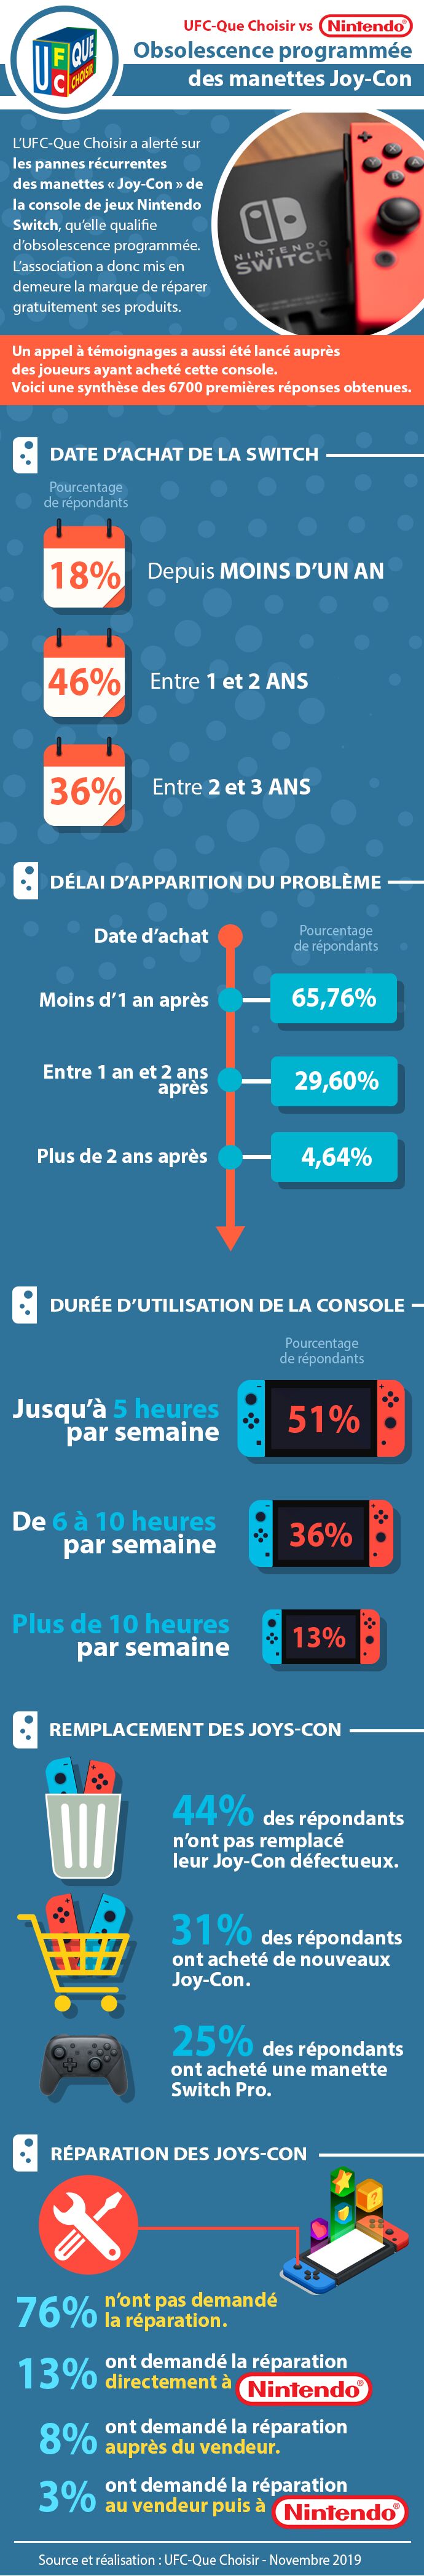 INFOGRAPHIE SWITCH final 1